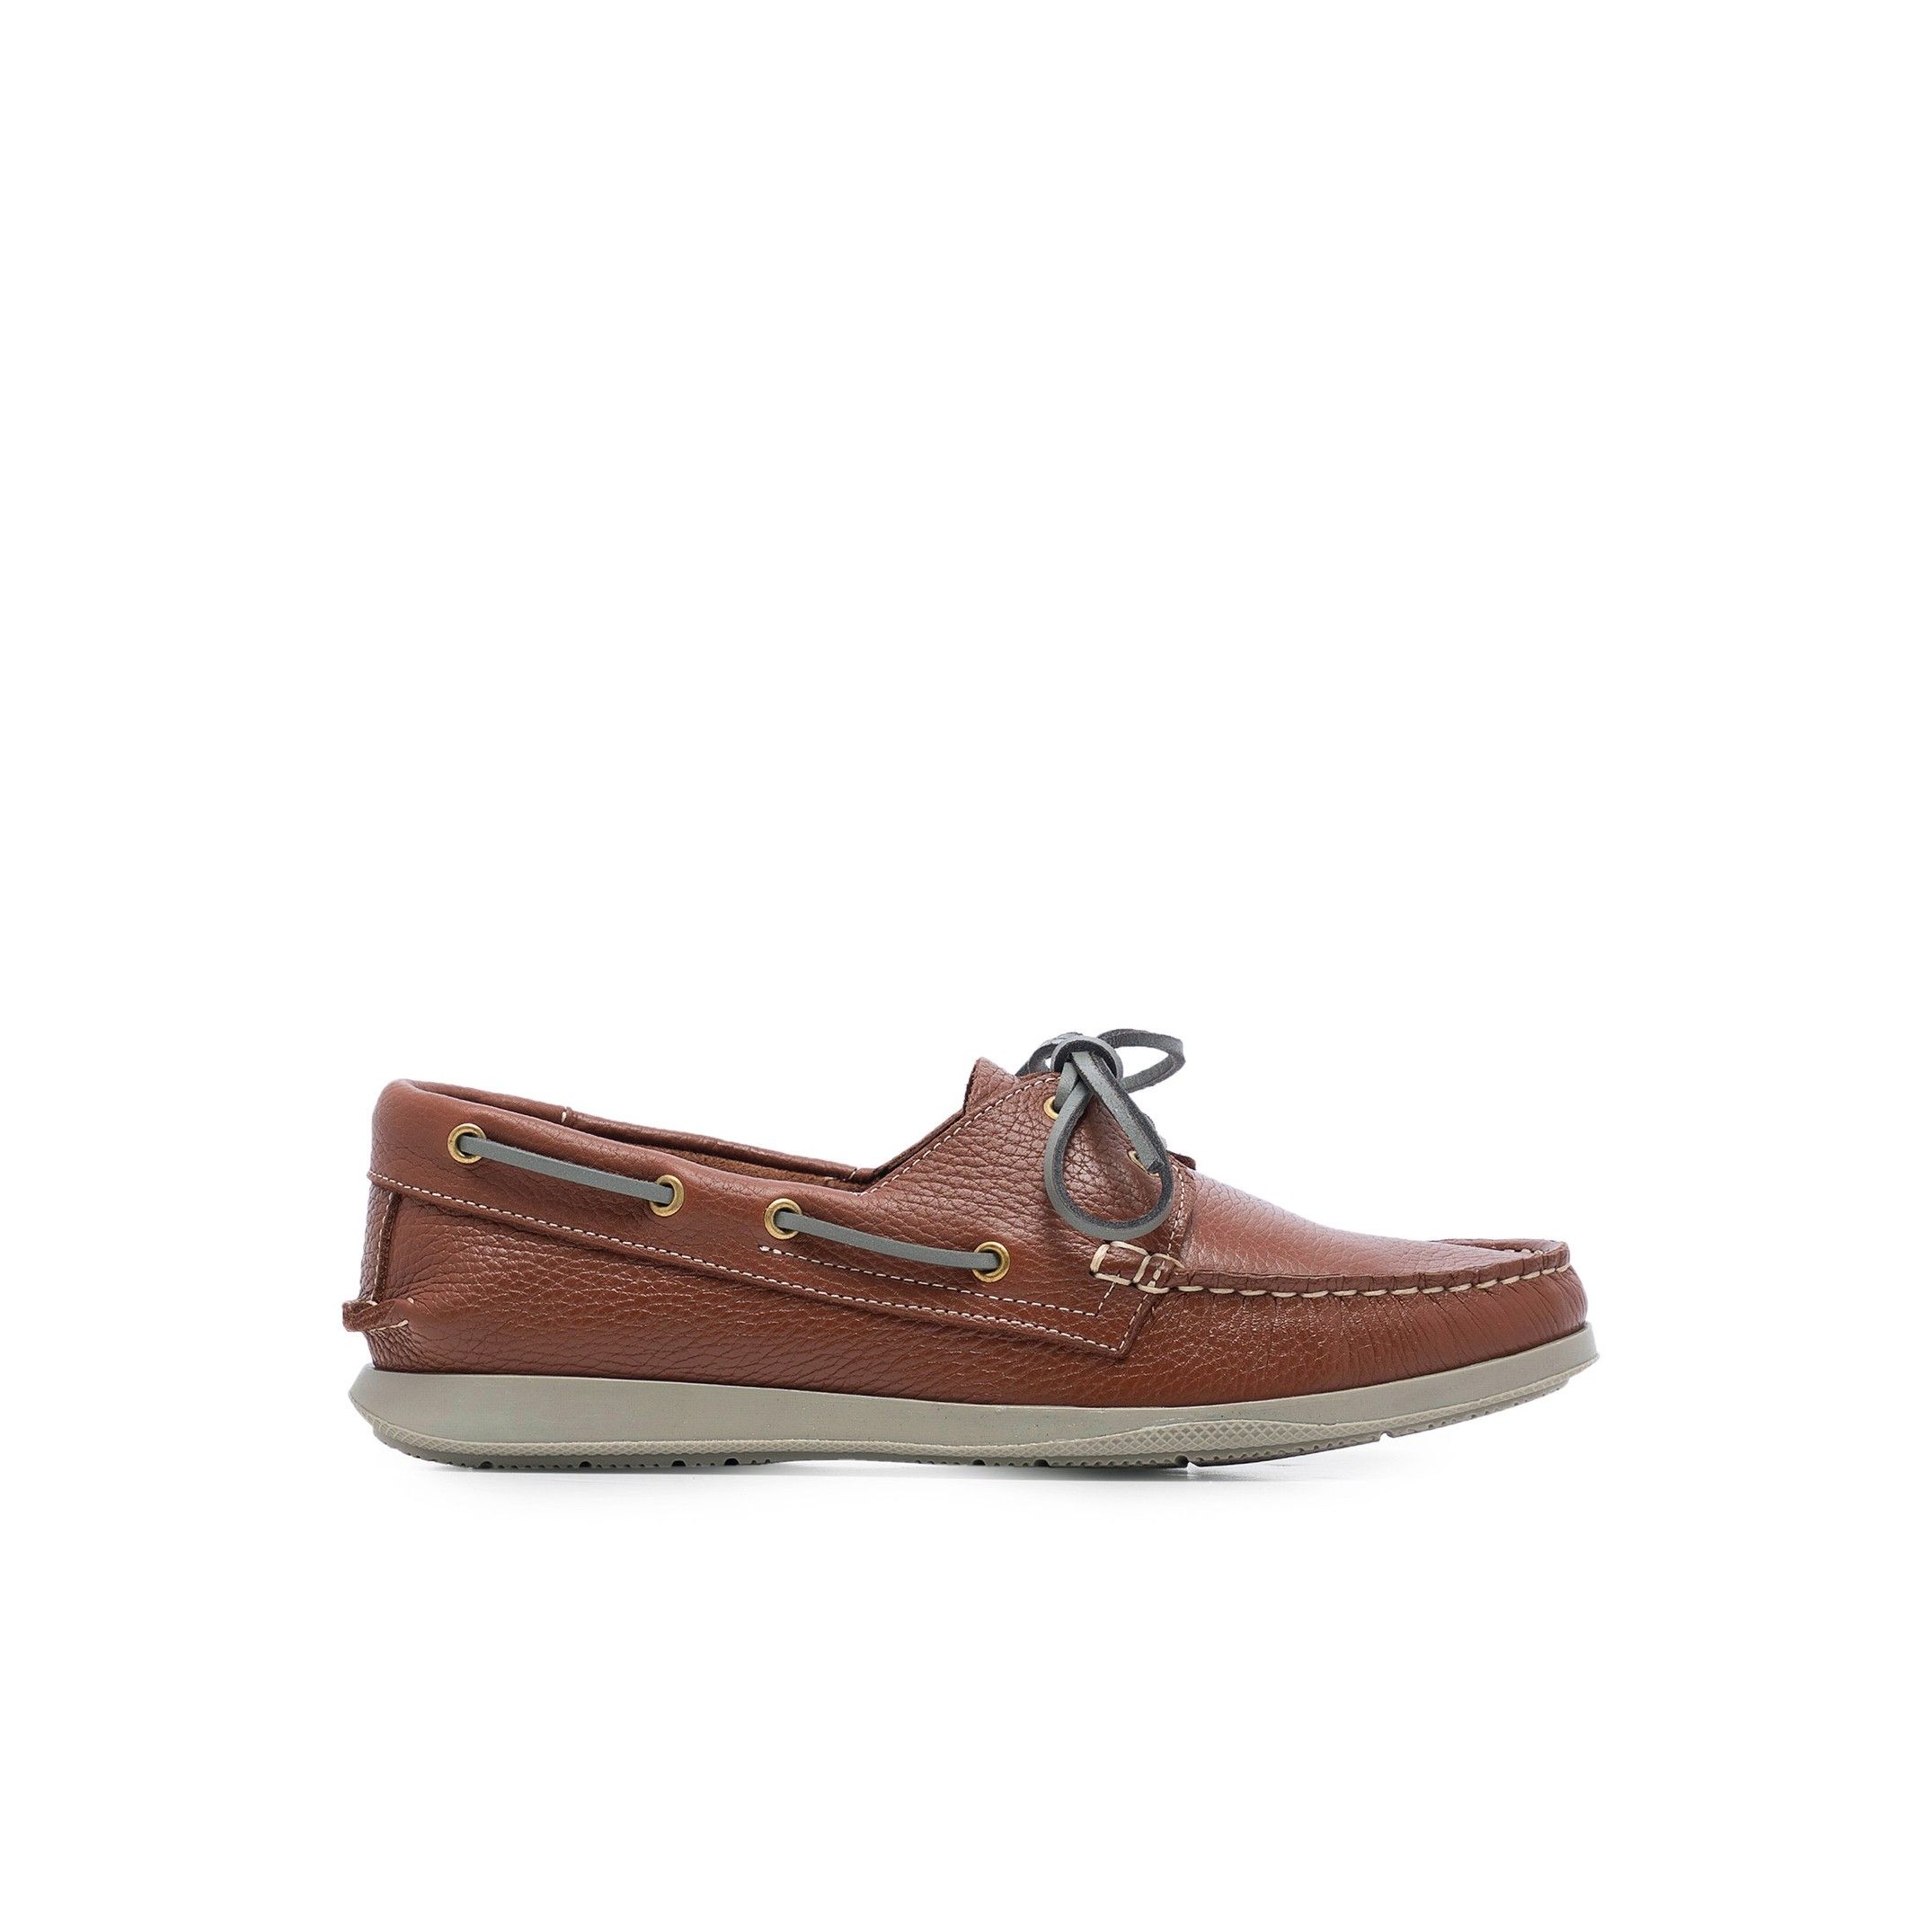 Leather boat shoes, by Son Castellanisimos. Upper made of cowhide leather. Closure of leather laces. Inner lining and insole: cowhide leather. Sole material: 100% synthetic and non-slip. Heel height: 2 cm. Designed and manufactured in Spain.